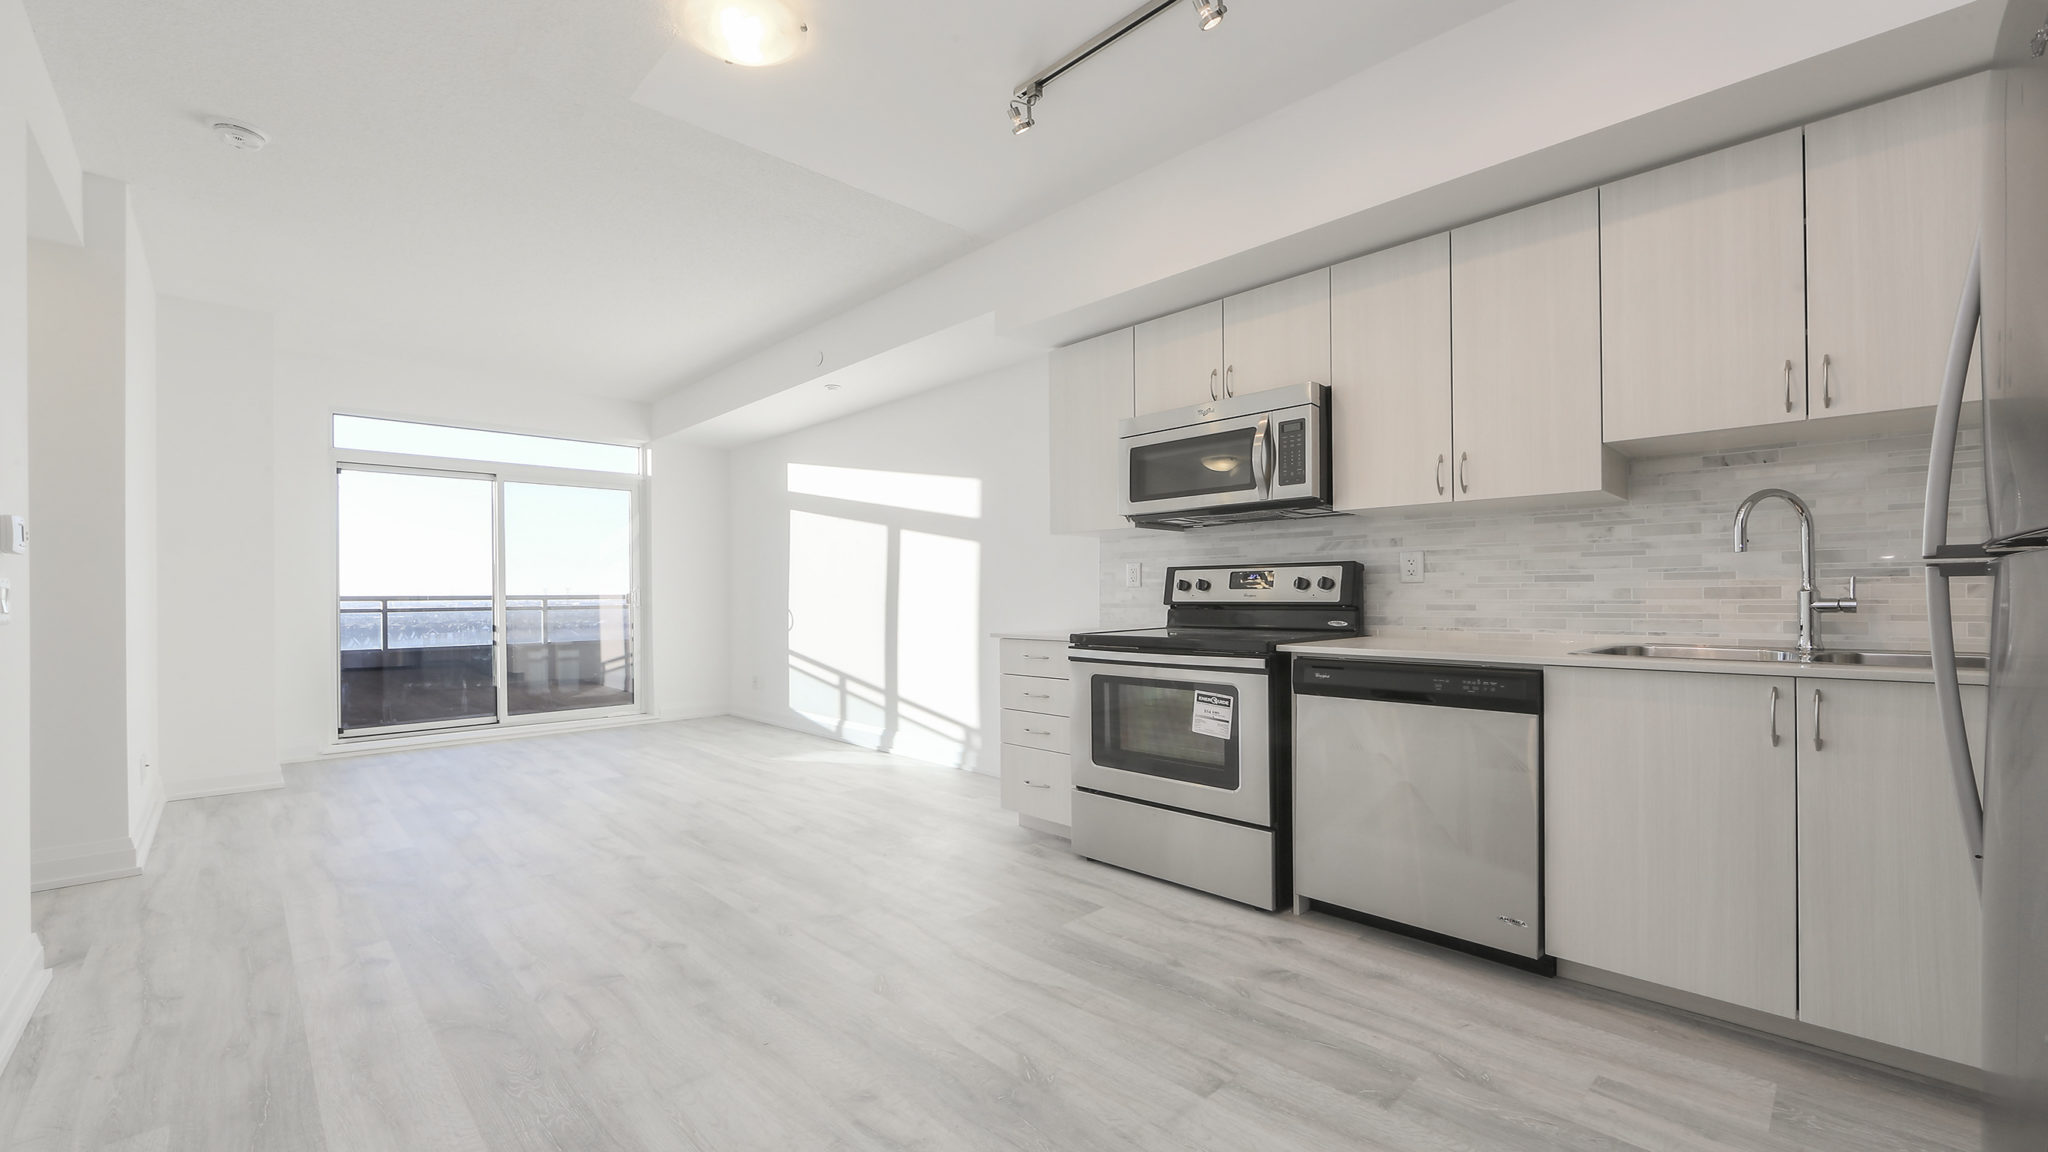 Another image showing the condo's open-concept style and lovely design. Here we see the kitchen and dining room.